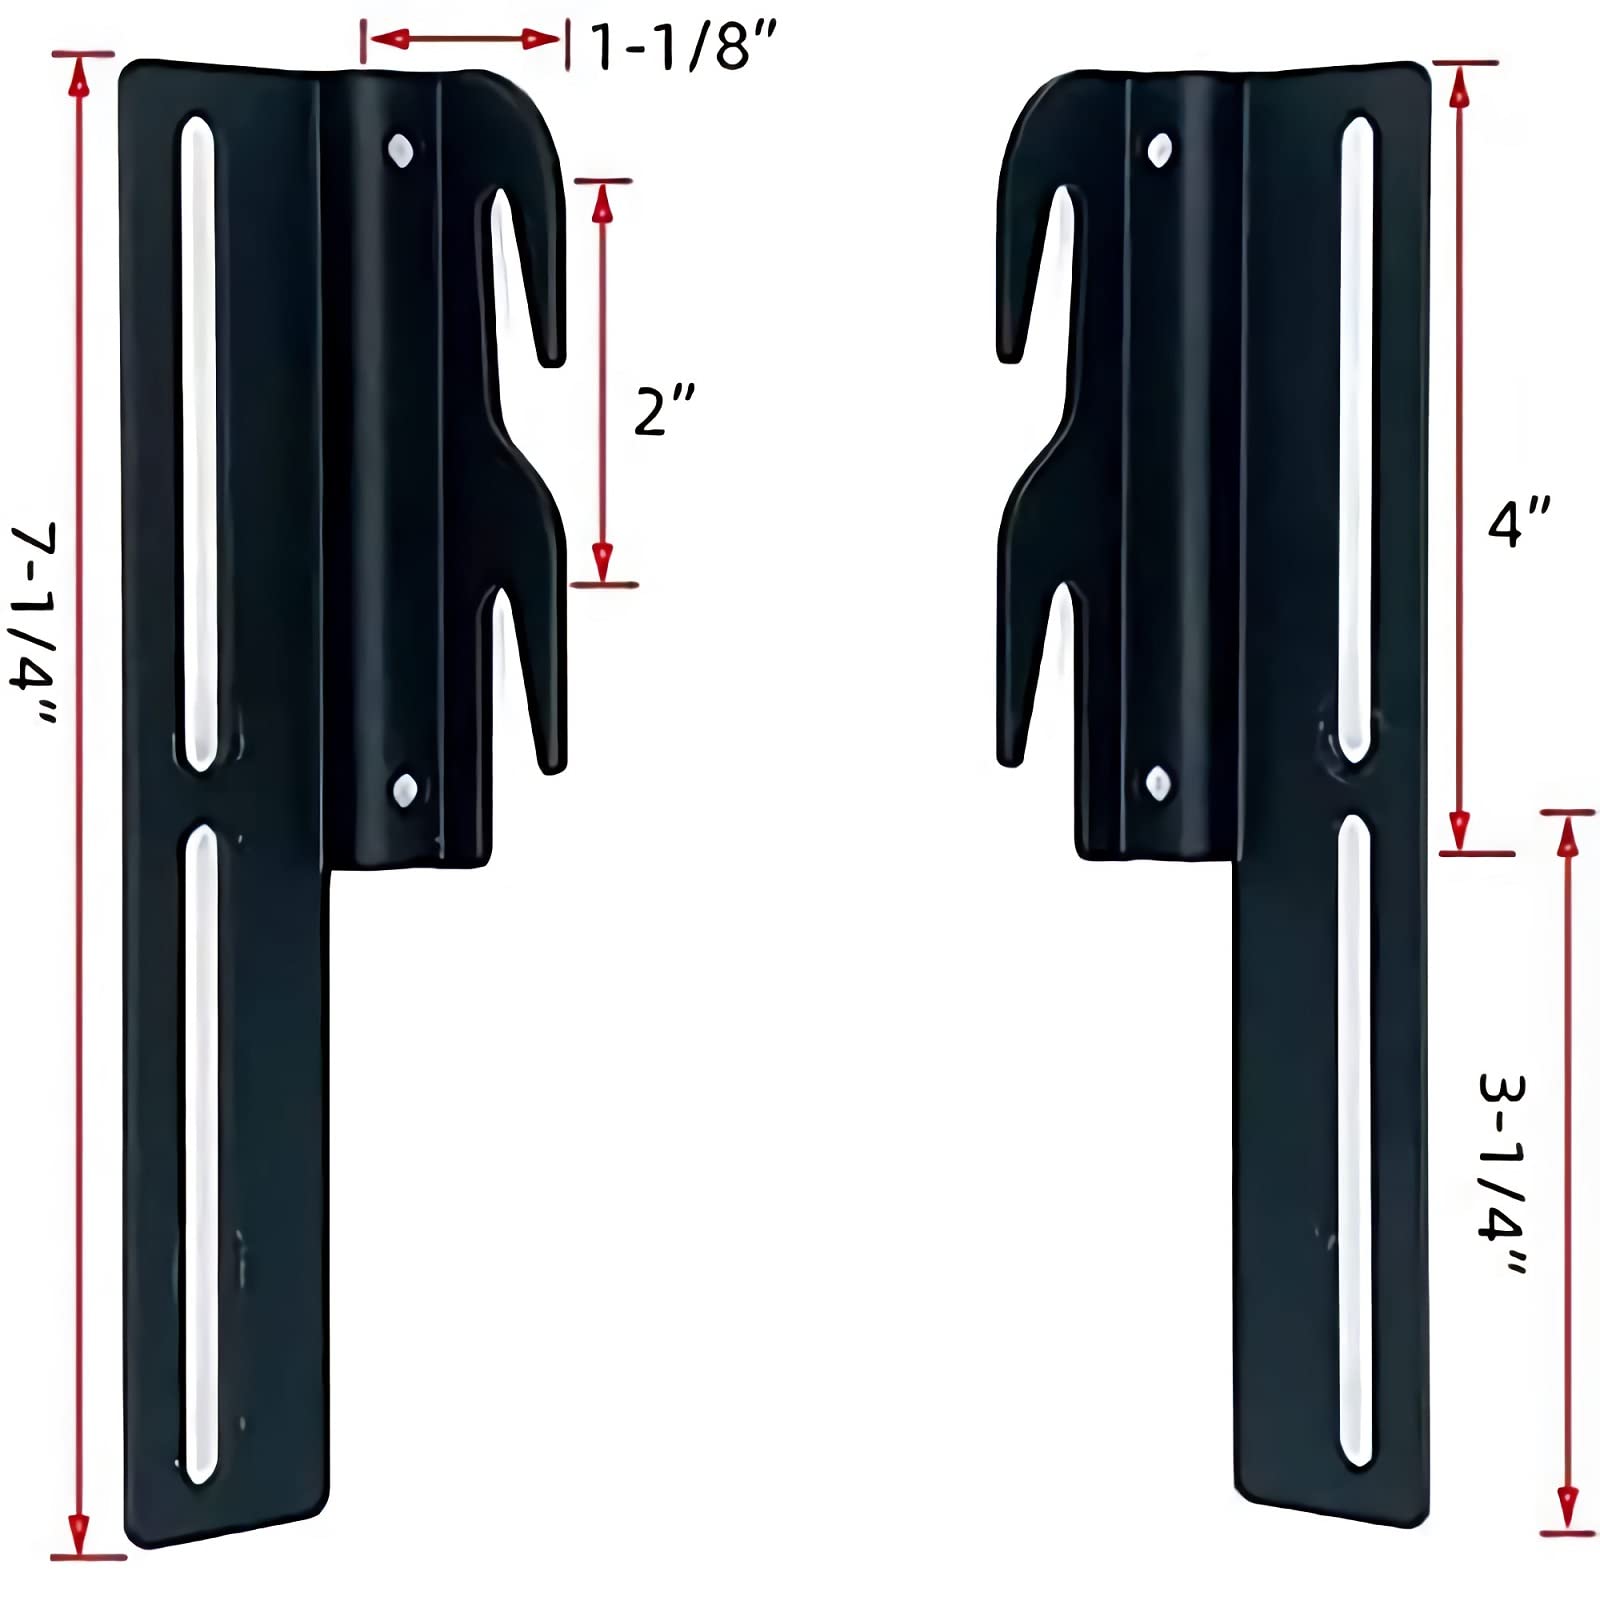 ruiru bro 2Pcs #711 Bolt-On to Hook-On Bed Frame Conversion Brackets for Headboard or Footboard,Bed Hook Adapter kit with Hardware, Hook on Bed Rails Brackets(Black)